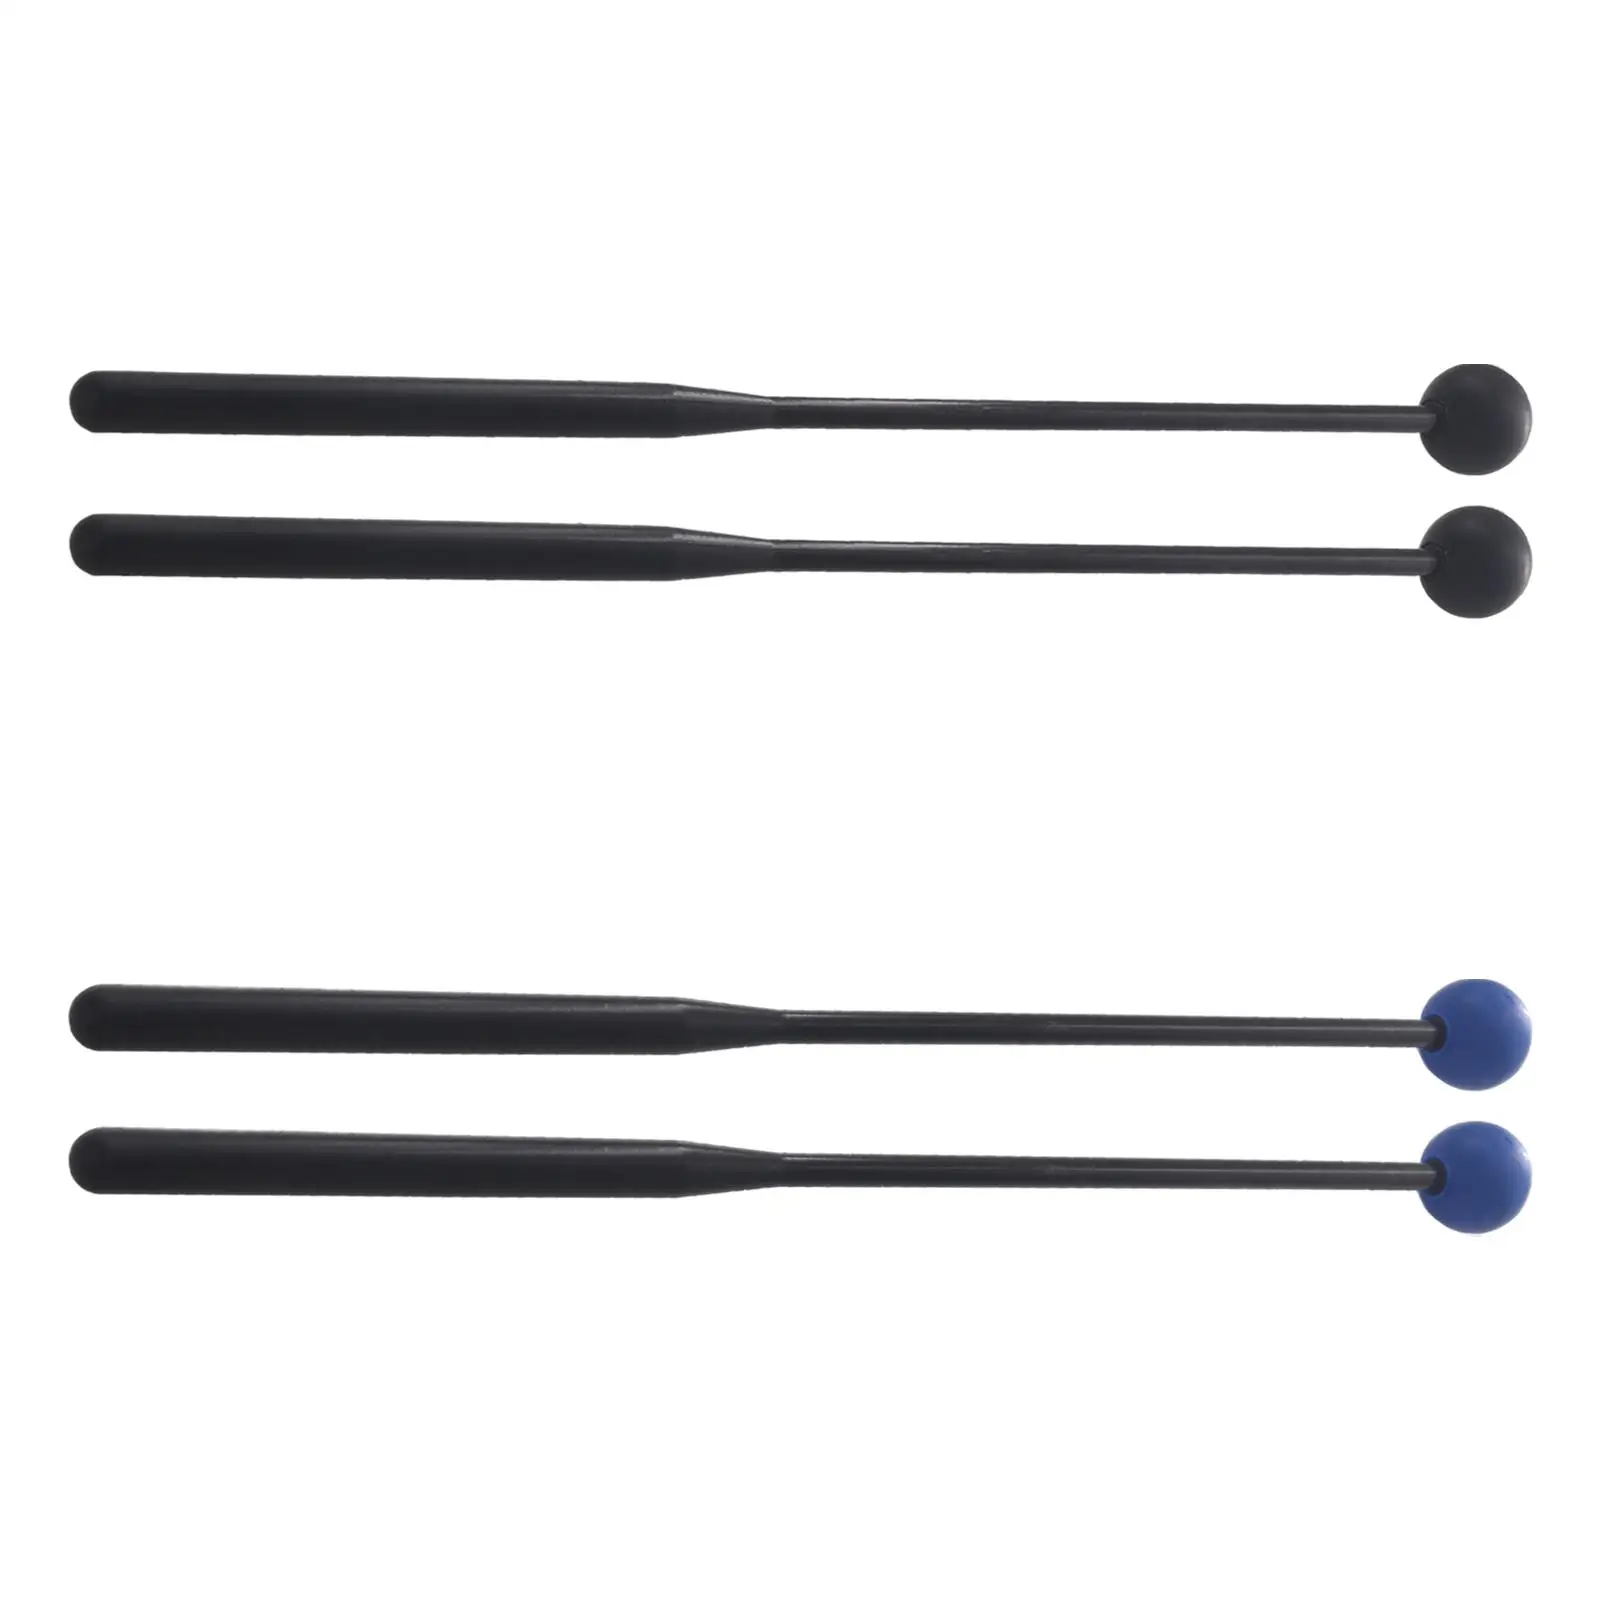 2 Pieces Drum Mallet 12`` Musical Drumstick Percussion Xylophone Mallets for Meditation Marimba Timpani Stage Music Education